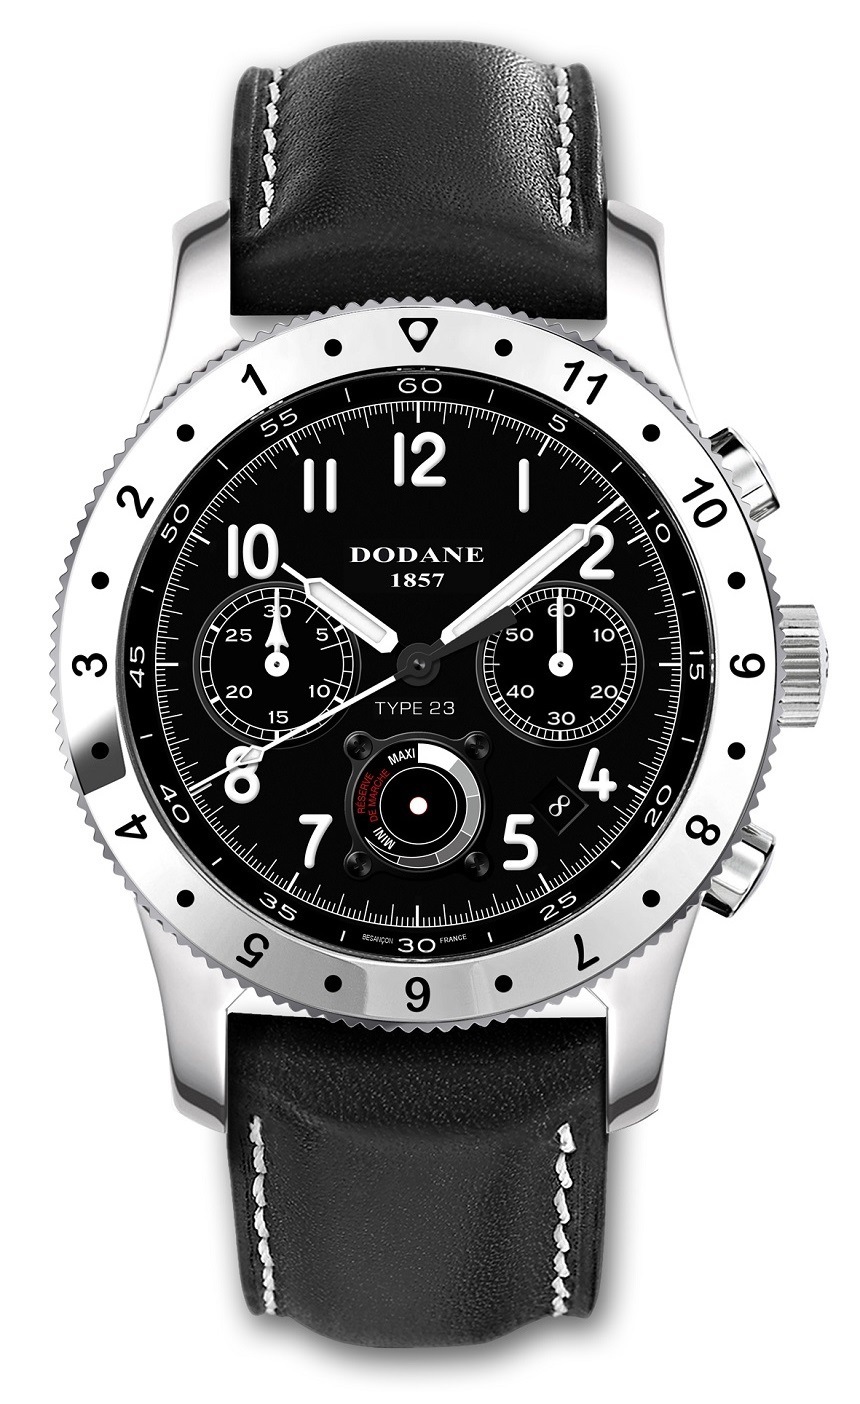 Dodane Type 23 Watches For 2015 Watch Releases 